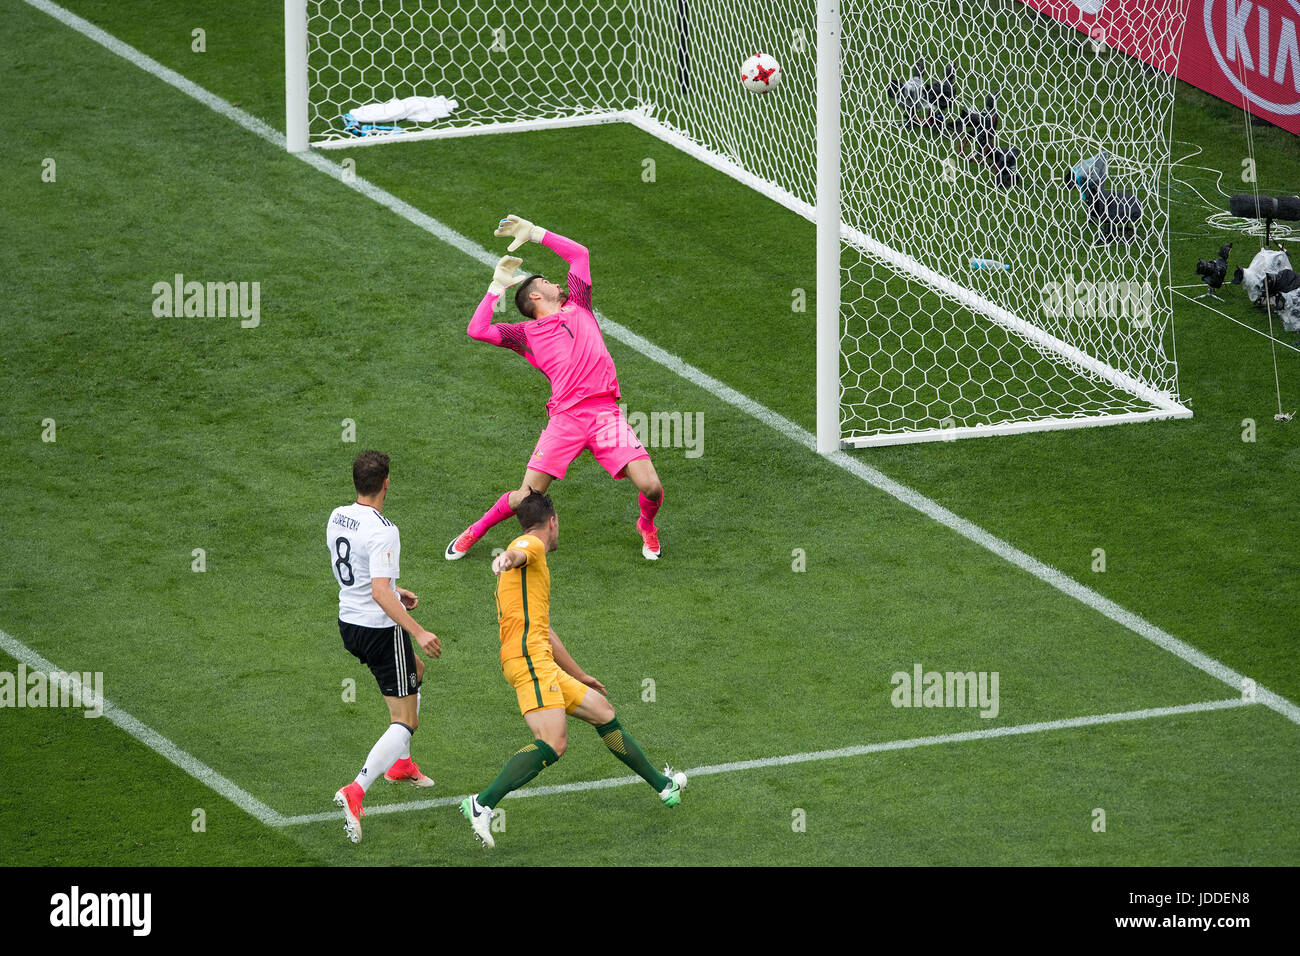 Sochi, Russia. 19th June, 2017. Germany's Leon Goretzka (in white) beats Australian keeper Maty Ryan (in pink) and defender Milos Degenek (C) to give his side a 3:1 lead during the Confederations Cup group stages Group B match between Australia and Germany in the Fisht Stadium in Sochi, Russia, 19 June 2017. Germany won 3:2. Photo: Marius Becker/dpa/Alamy Live News Stock Photo